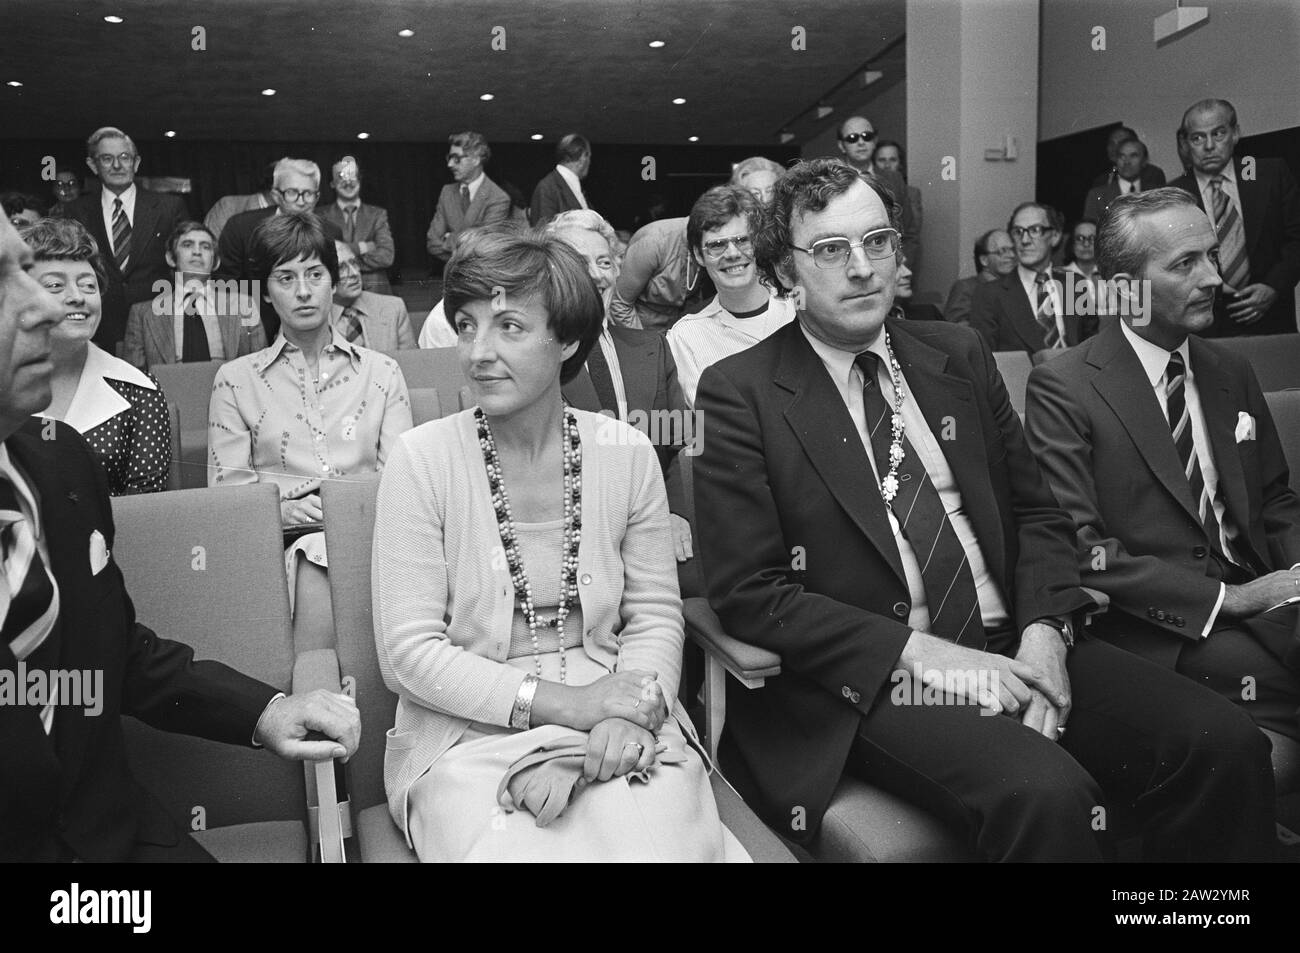 Pr. Margriet at presentation publicity campaign Obstacles Handicapped Van Gogh Museum Amsterdan Date: June 30, 1977 Location: Amsterdam, Noord-Holland Keywords: disabled, princesses Person Name: Marguerite, Princess Institution Name: Rijksmuseum van photographer Vincent Peters, Hans / Anefo Copyright Holder: National Archives material Type: Negative (black / white) archive inventory number: see access 2.24.01.05 Stock Photo